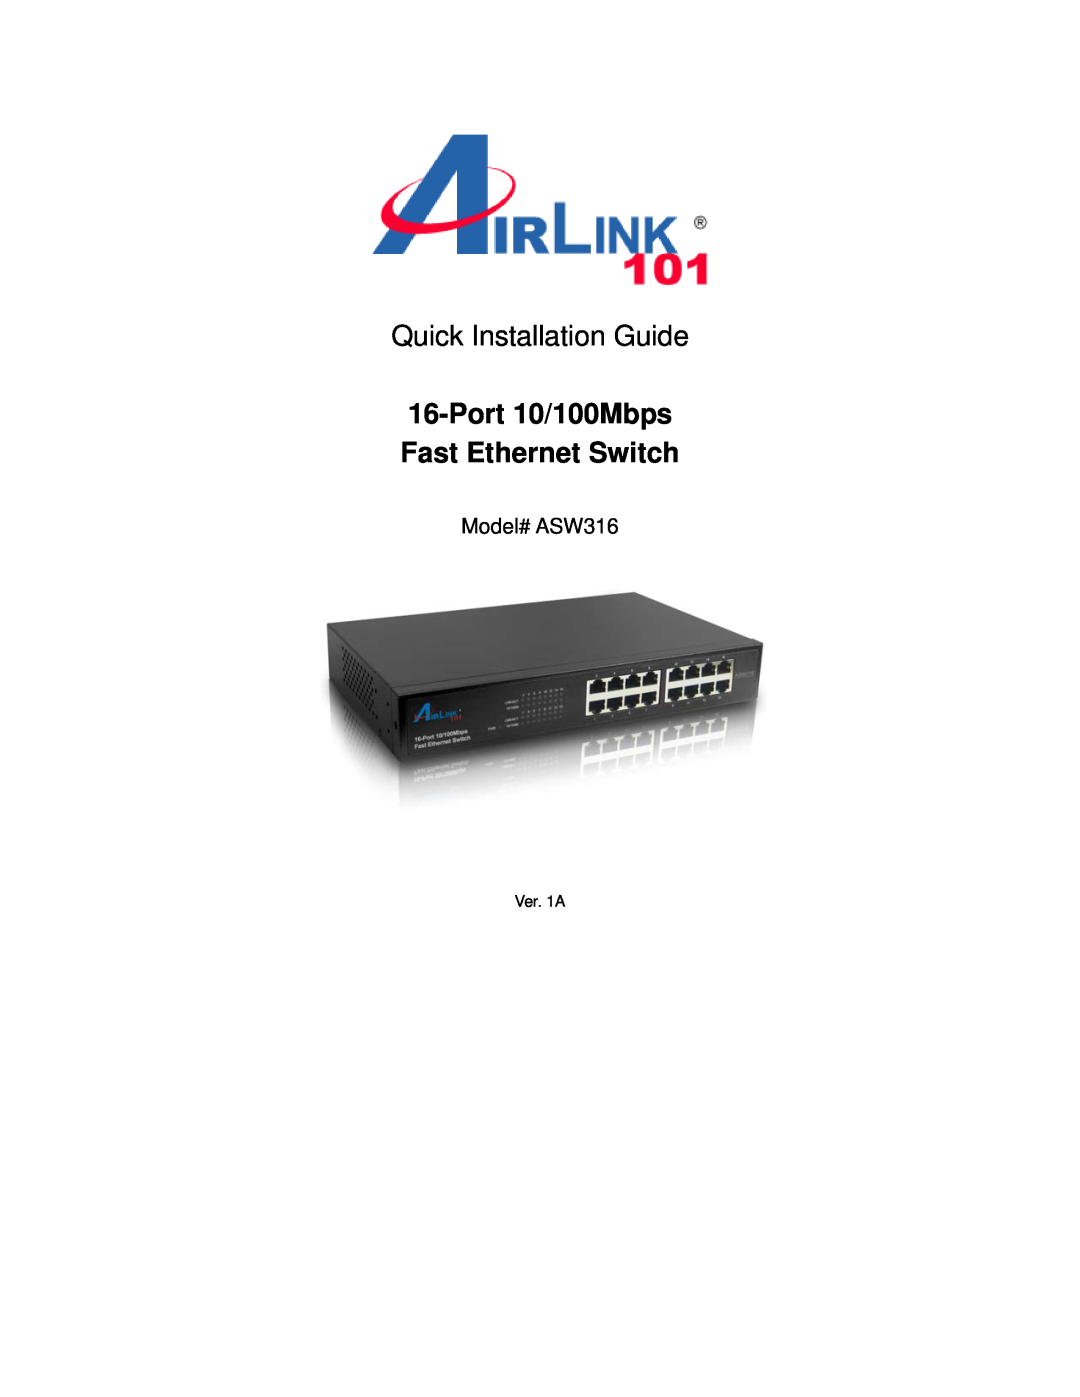 Airlink101 ASW316 manual Quick Installation Guide, Port 10/100Mbps Fast Ethernet Switch 